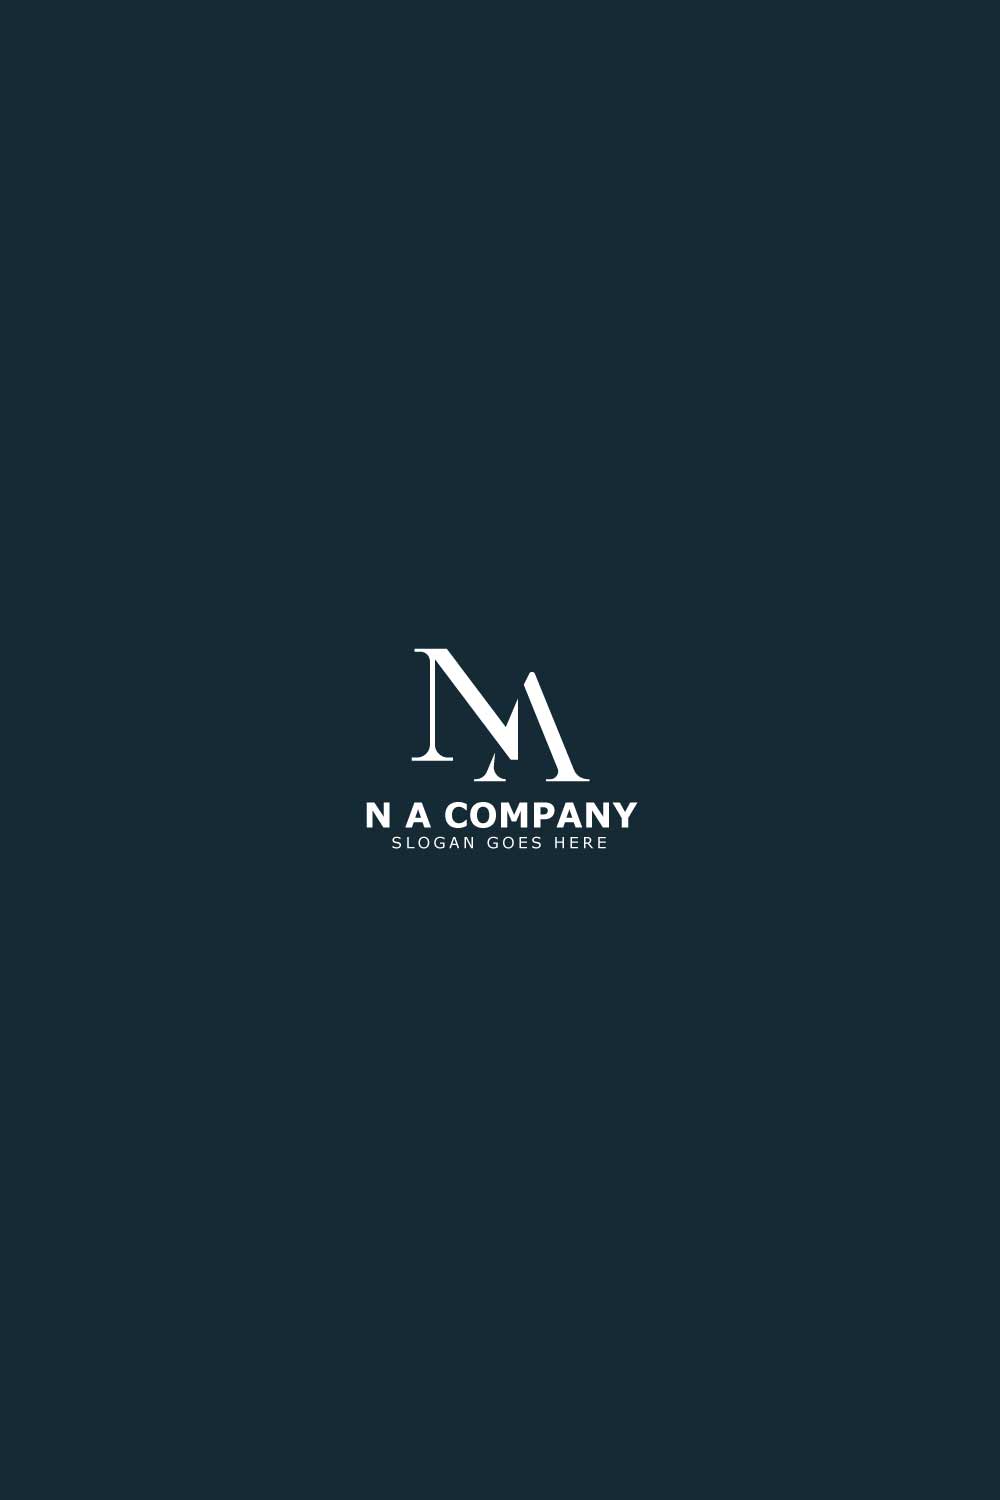 N A logo letter design on luxury background pinterest preview image.